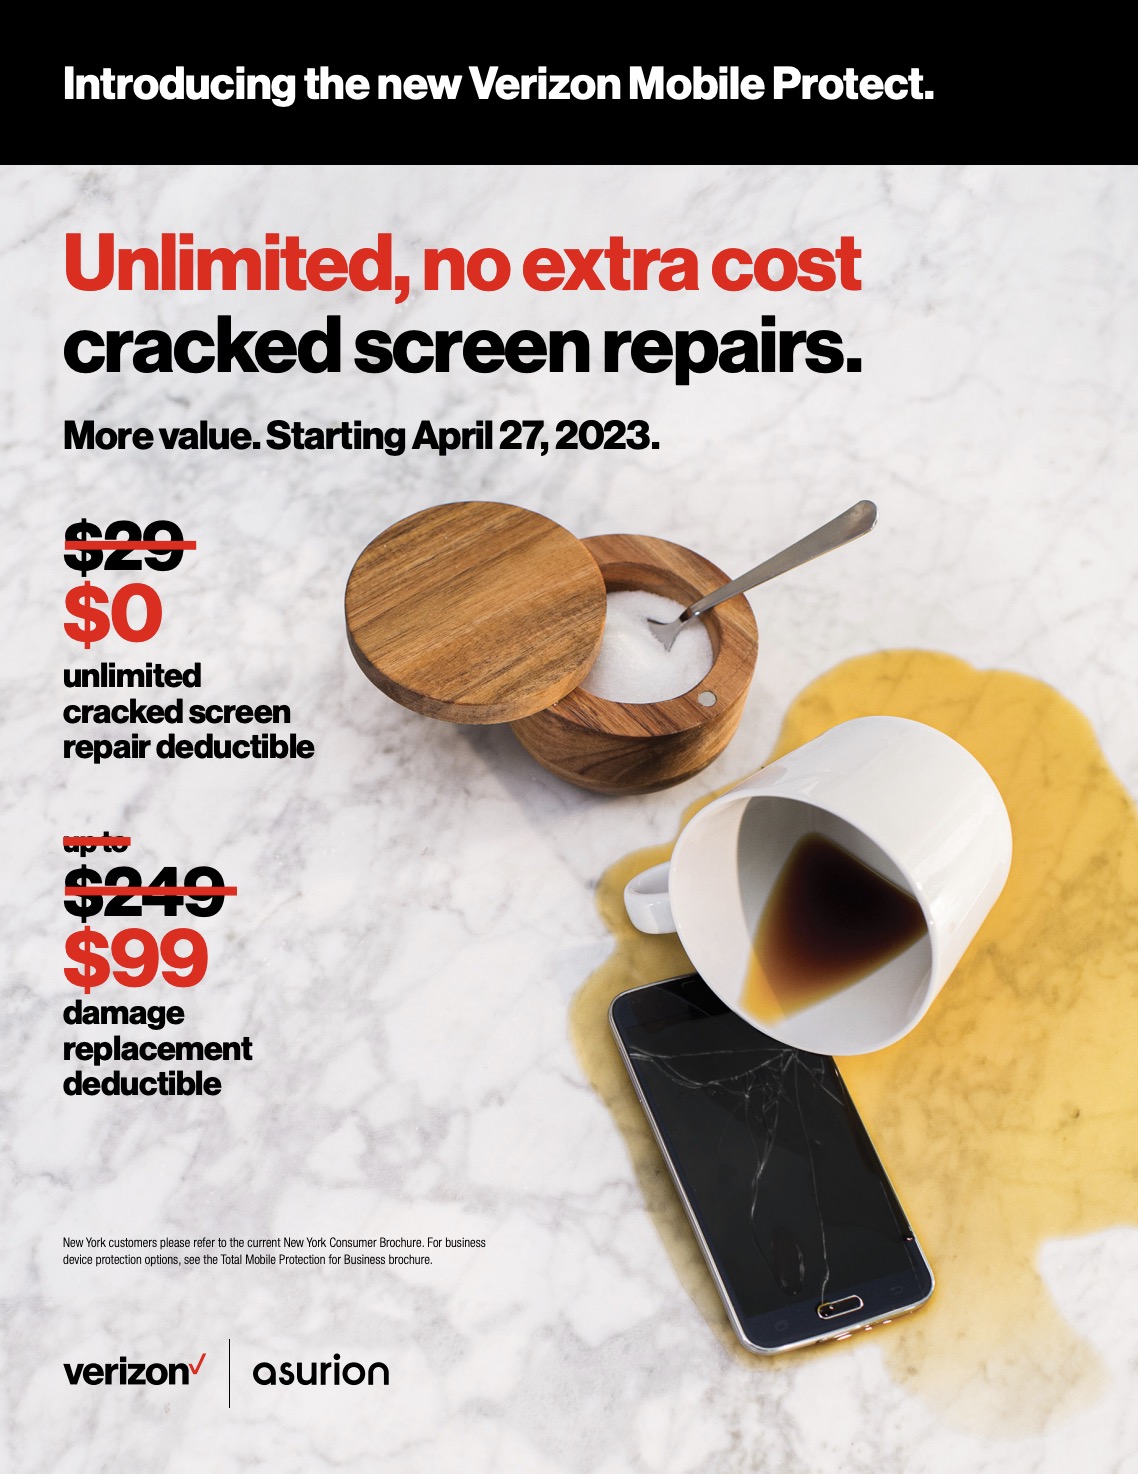 Verizon Announces $0 Unlimited Cracked Screen Repair With Mobile Protect, Open Enrollment